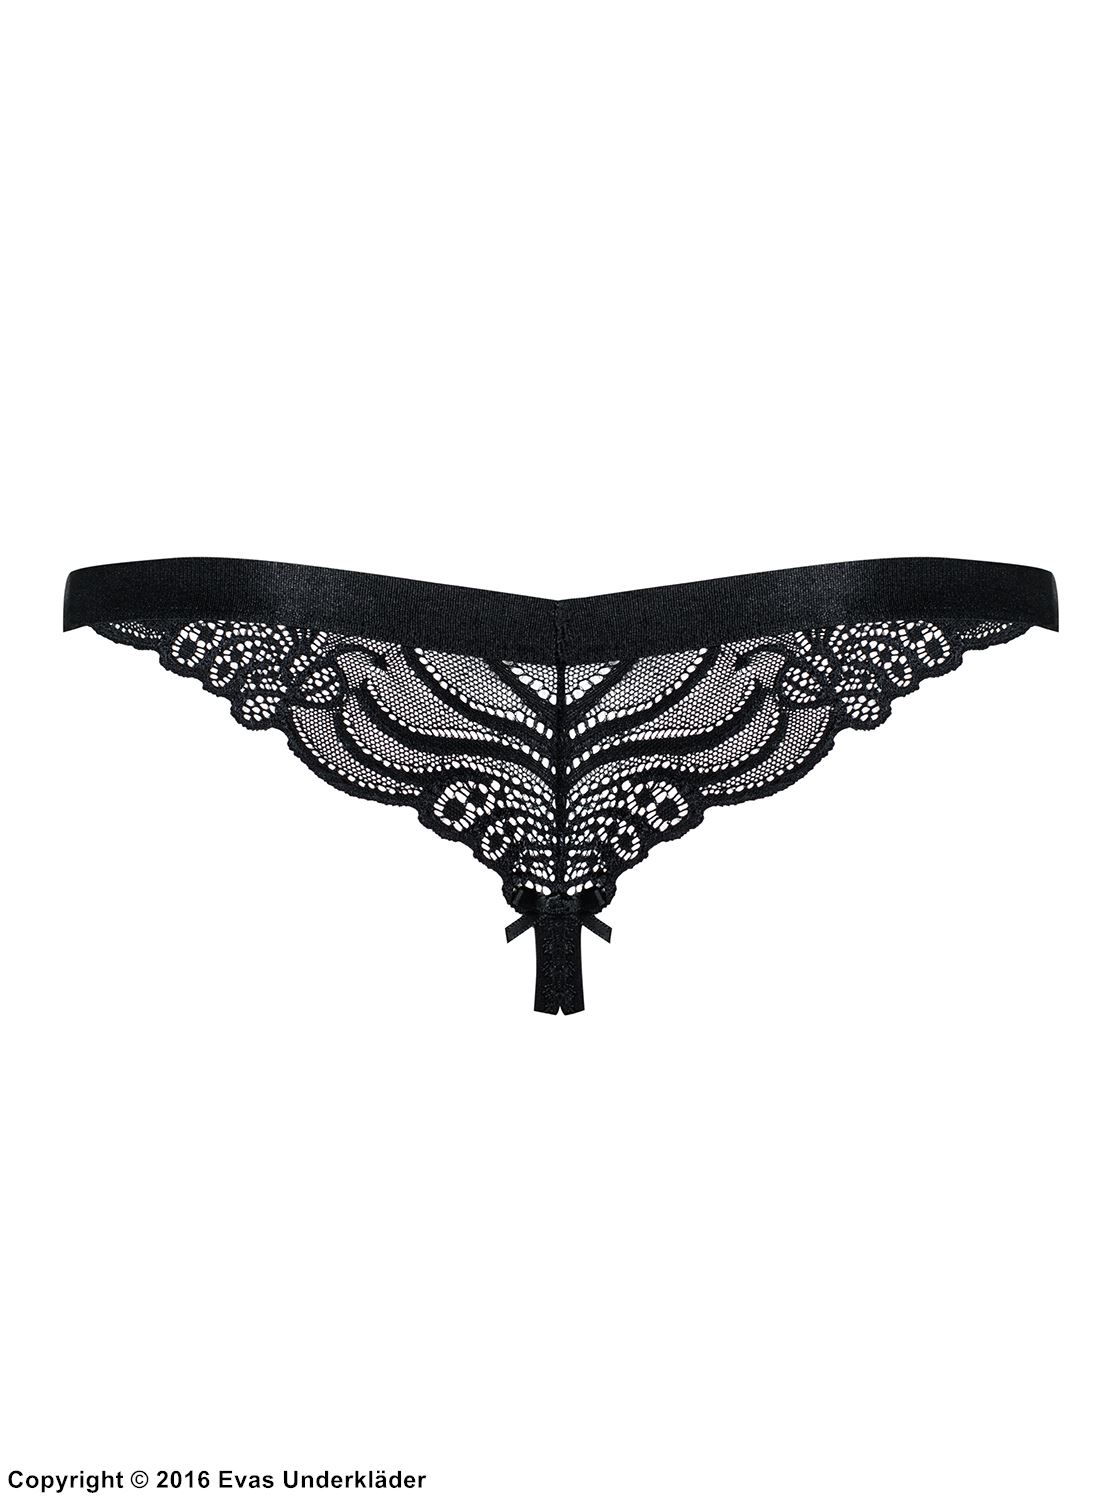 Seductive thong, open crotch, openwork lace